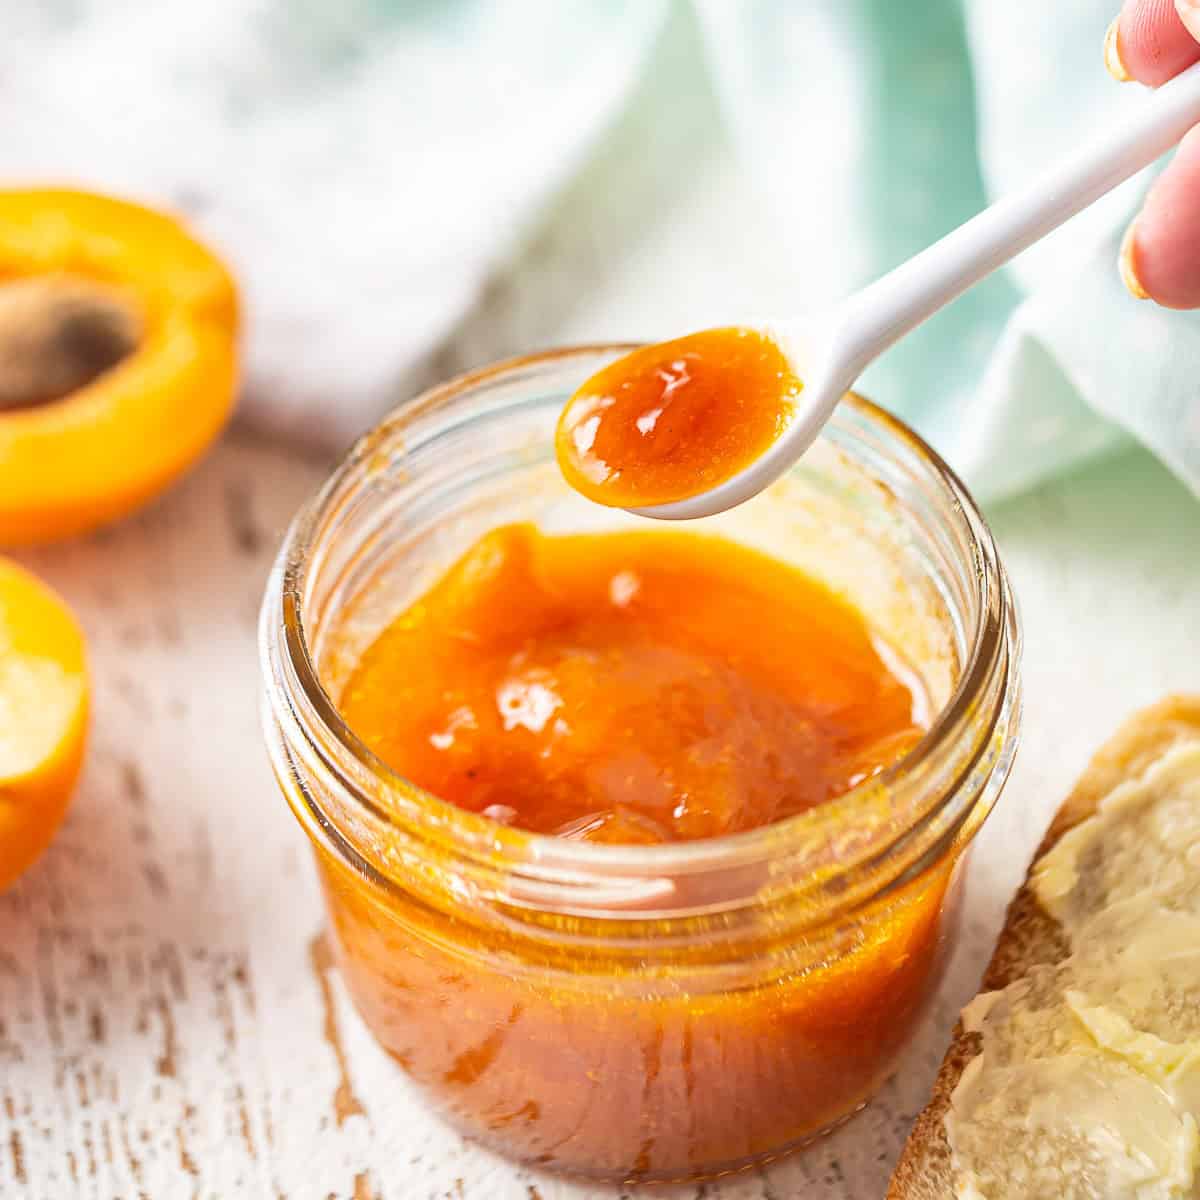 Spooning apricot jam from a glass jar.